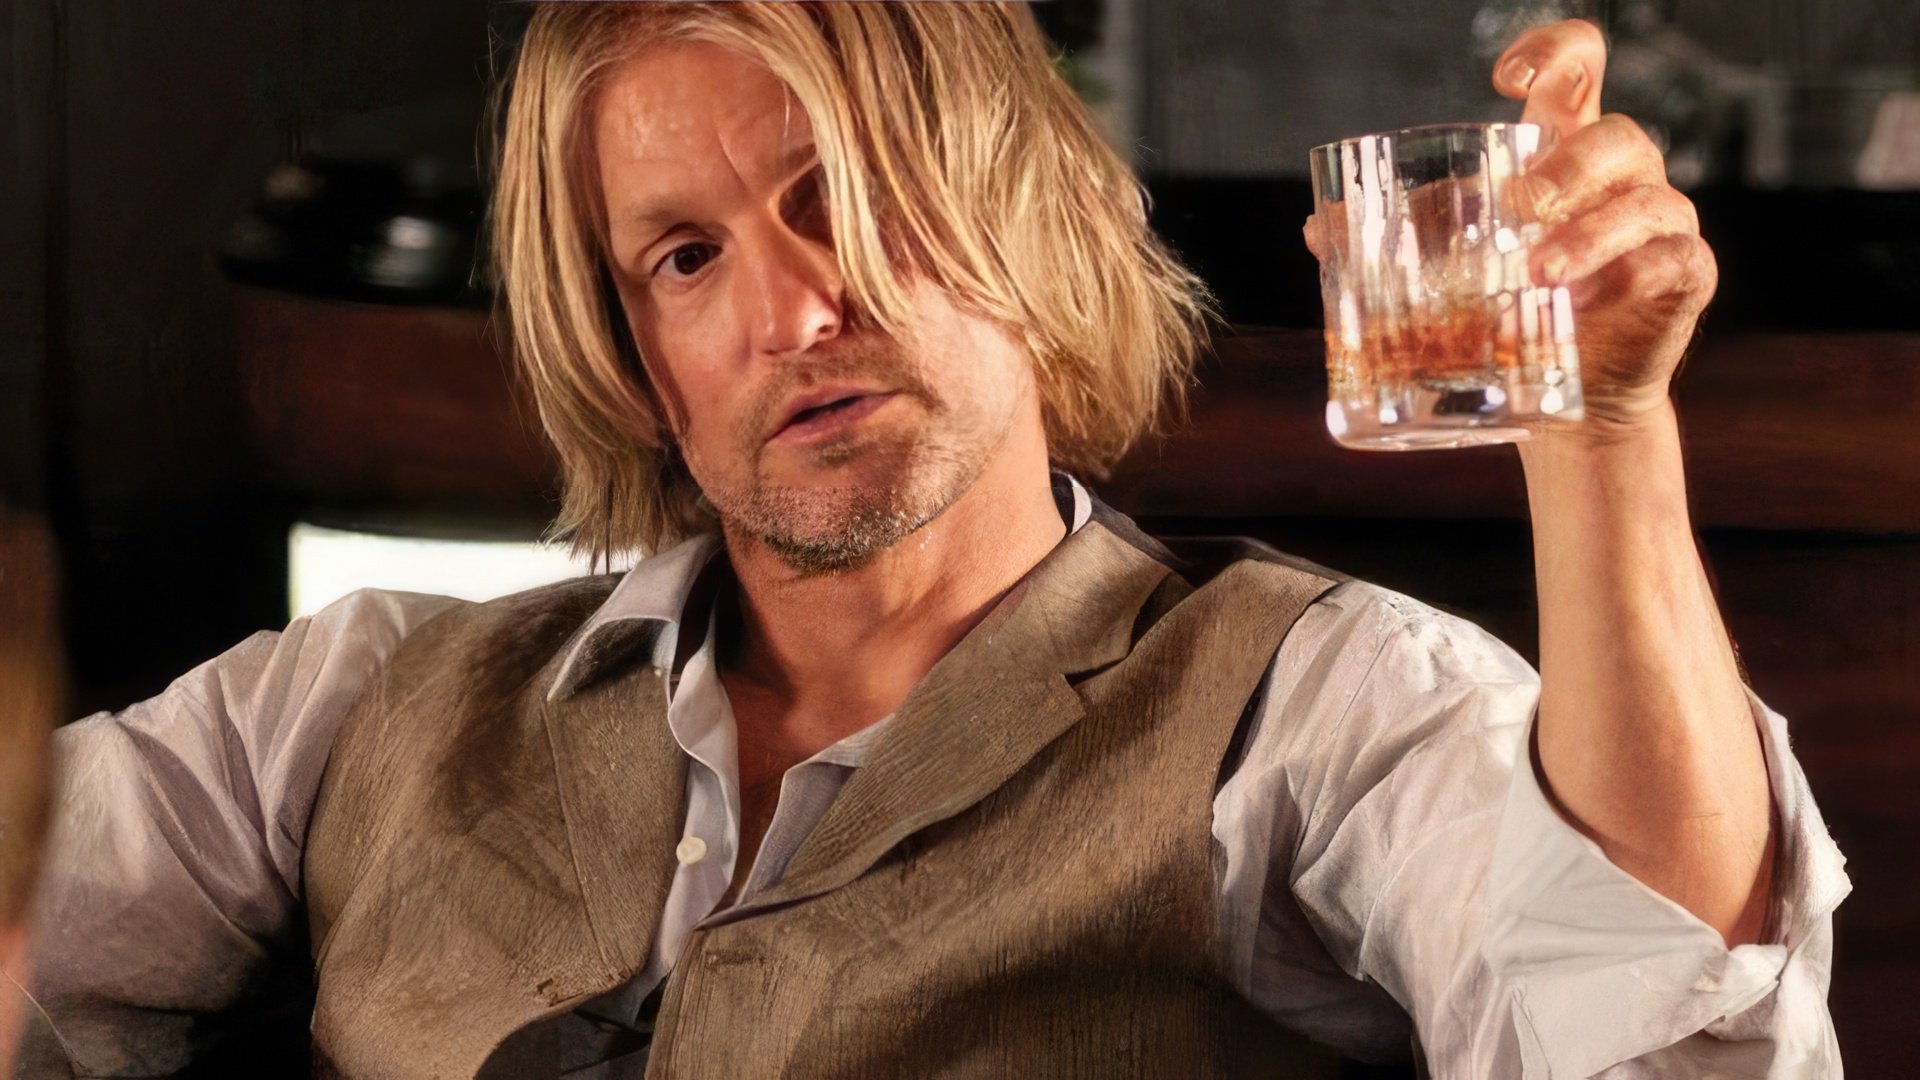 The Hunger Games: Woody Harrelson played Haymitch Abernathy